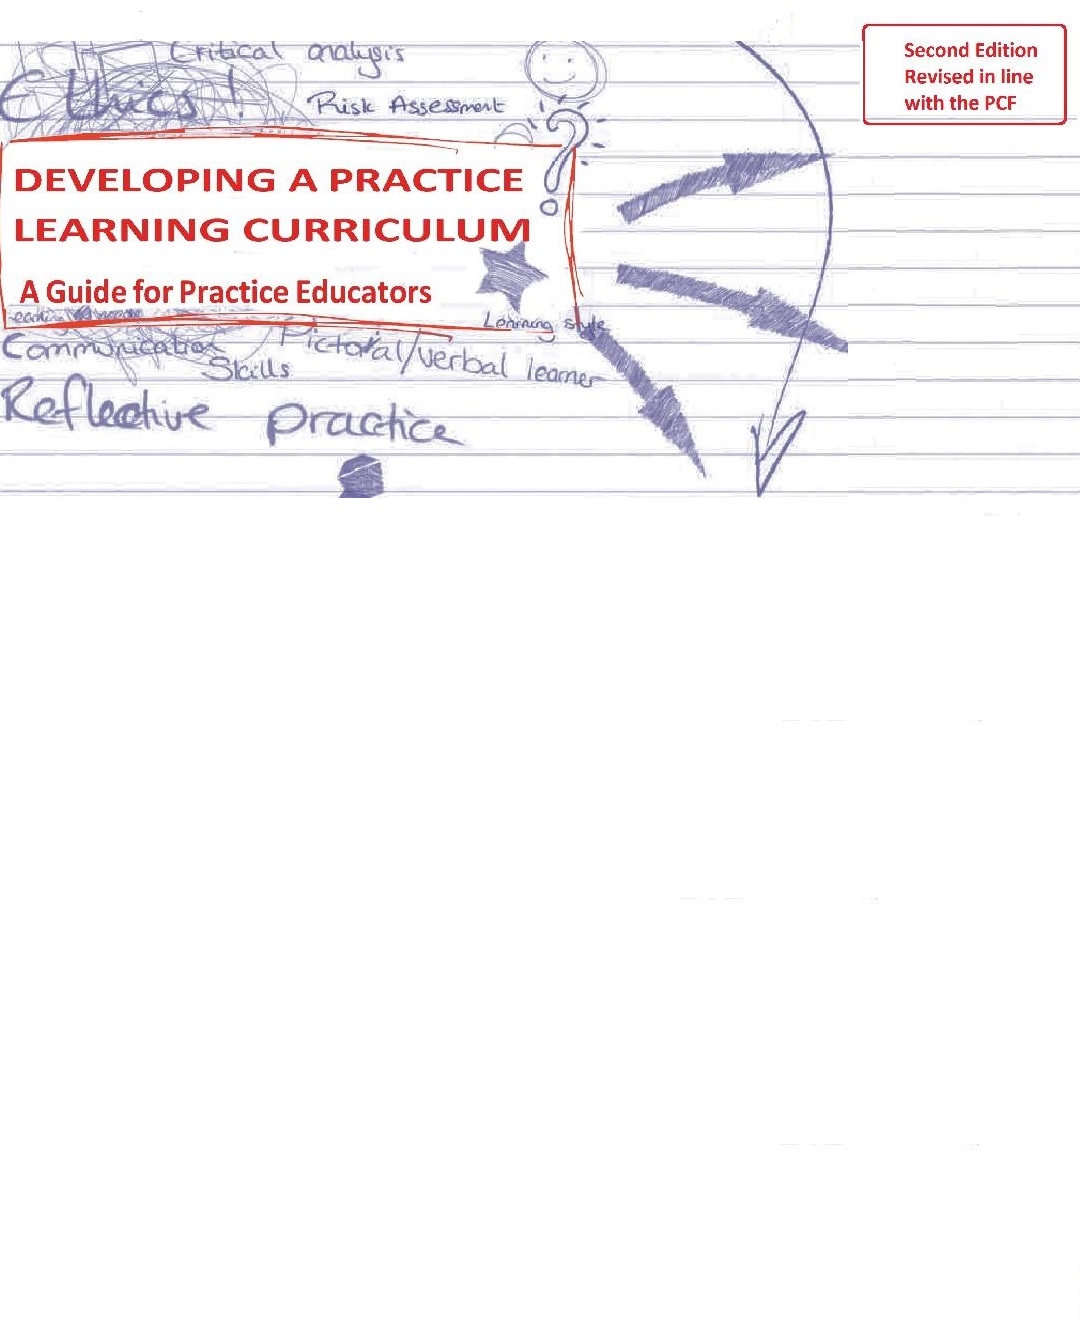 Developing a Practice Learning Curriculum: A Guide for Practice Educators